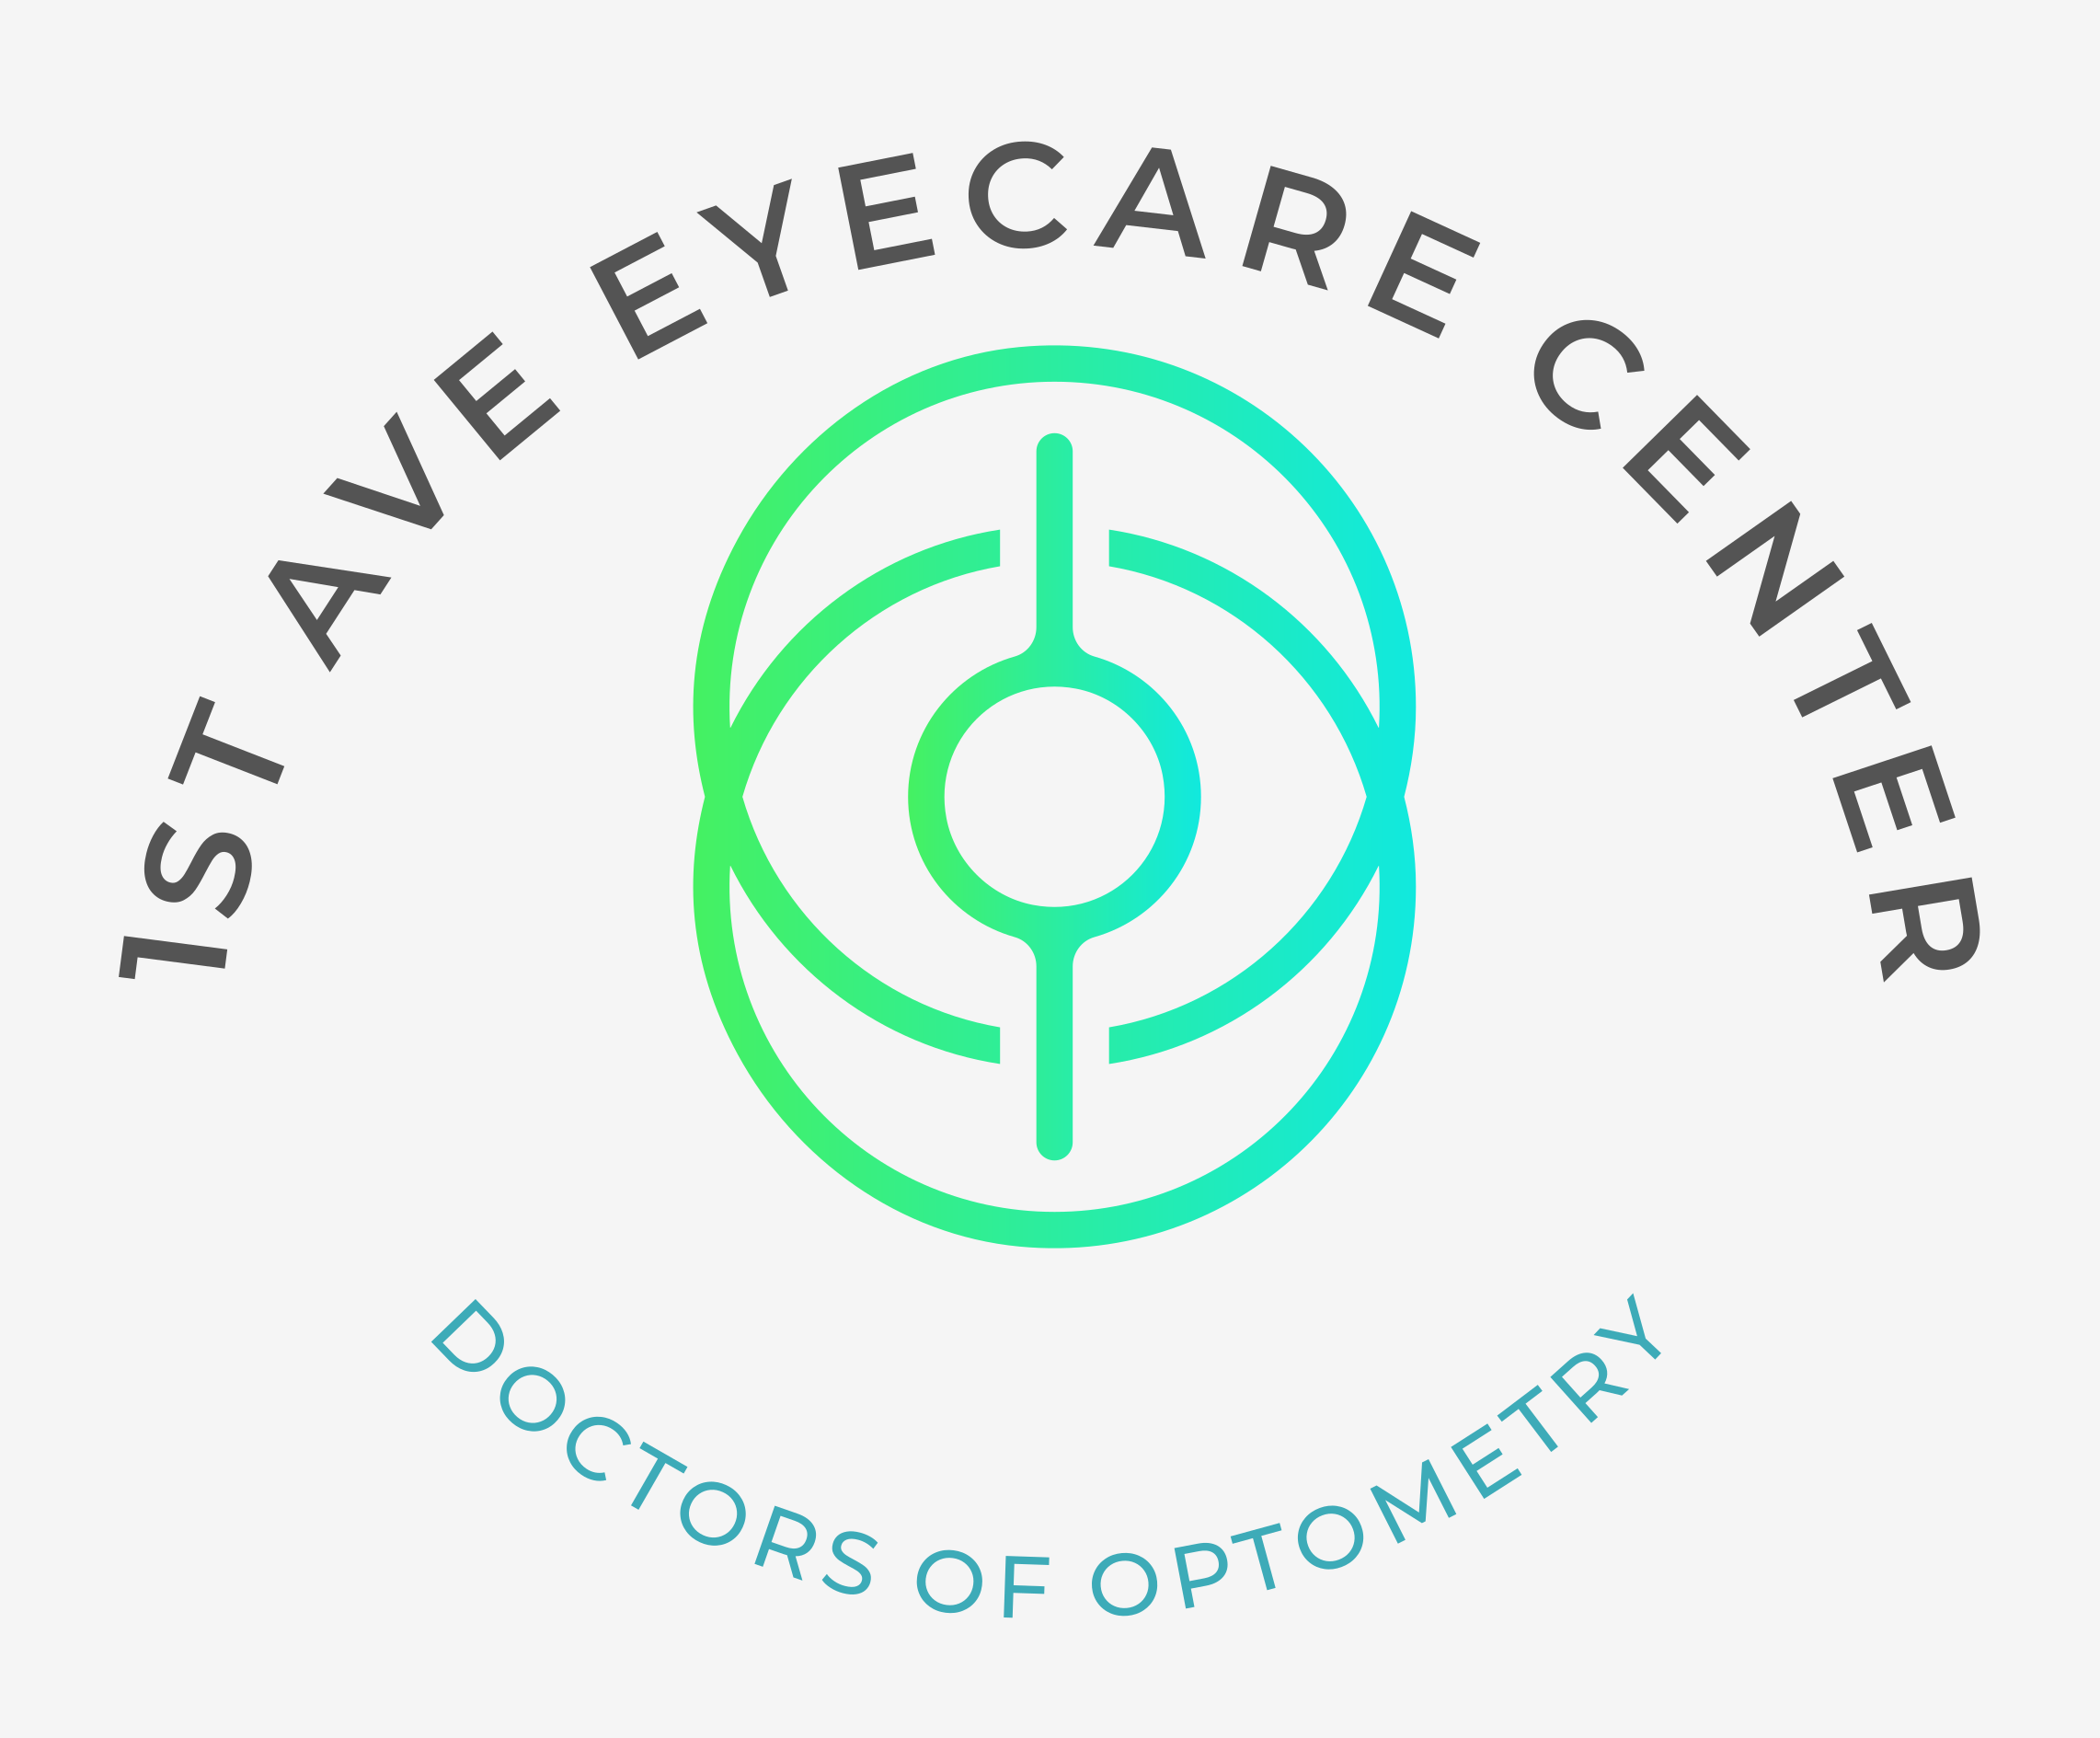 First Ave Eye Care